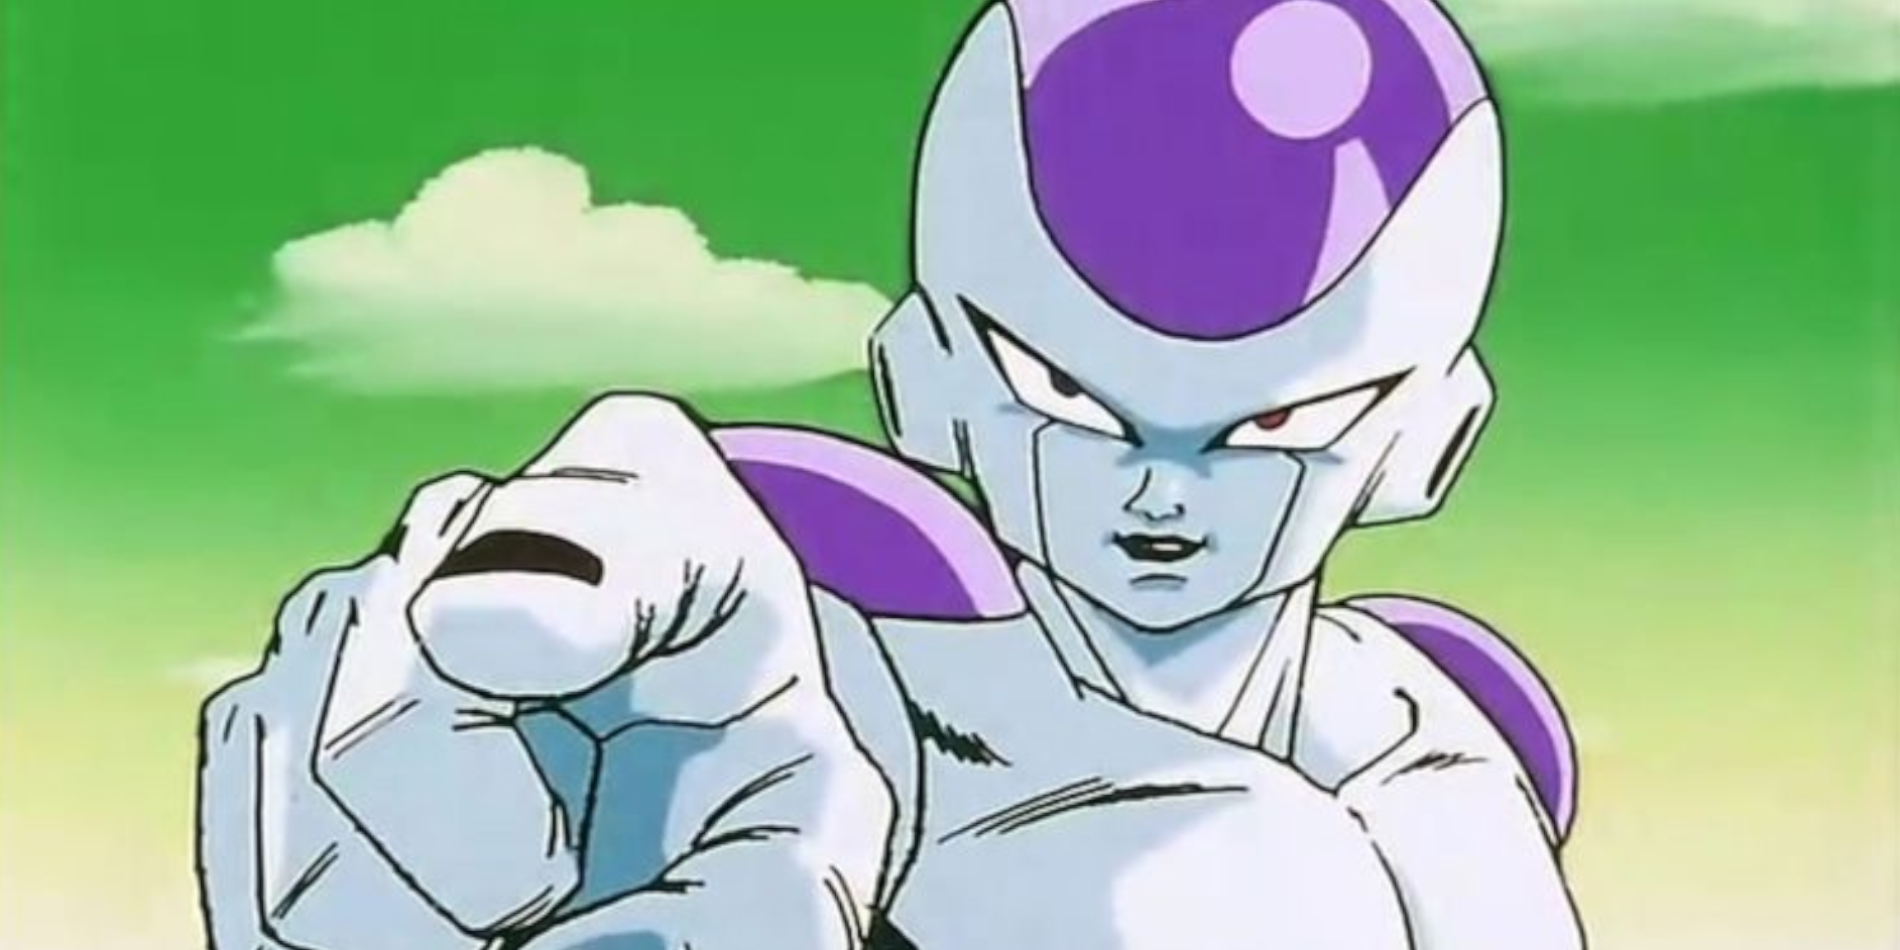 Frieza in his Final Form is pointing his finger.